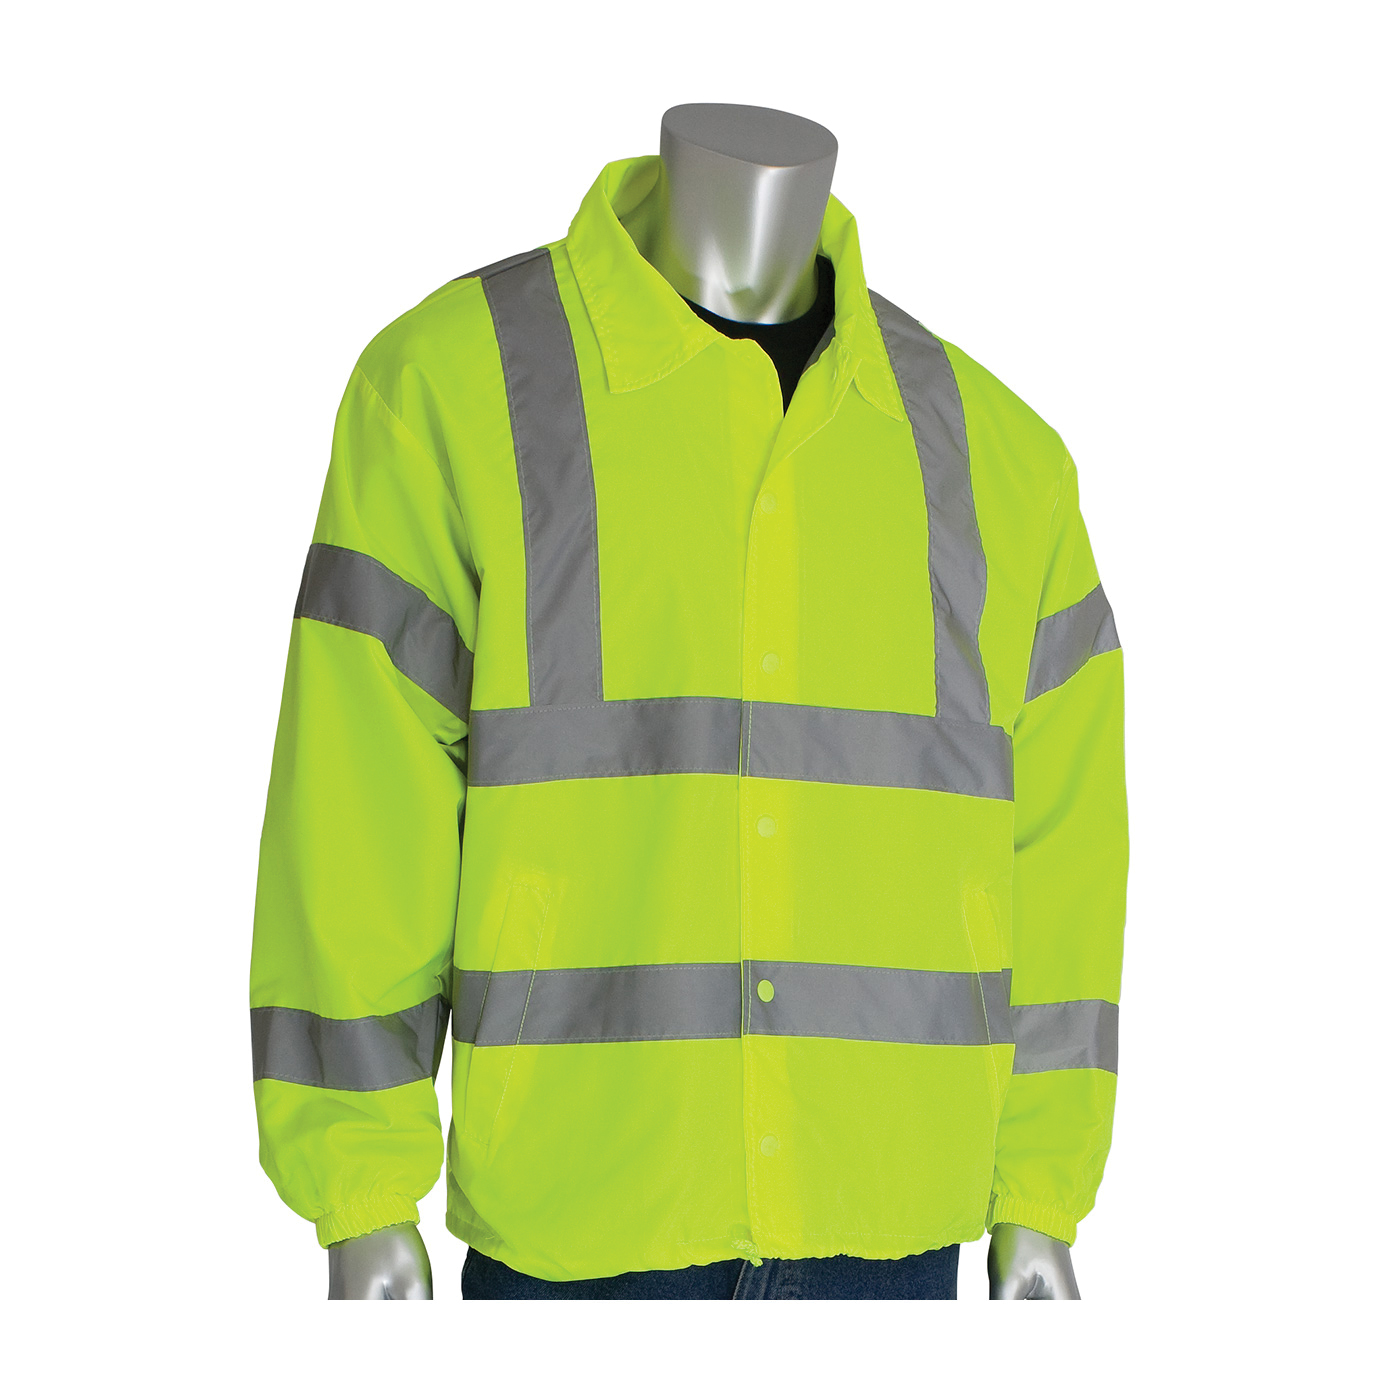 PIP® 333-WBLY-5X Classic Wind Breaker Jacket, Hi-Viz Lime Yellow, Polyester, 65.7 in Chest, Specifications Met: ANSI 107 Class 3 Type R